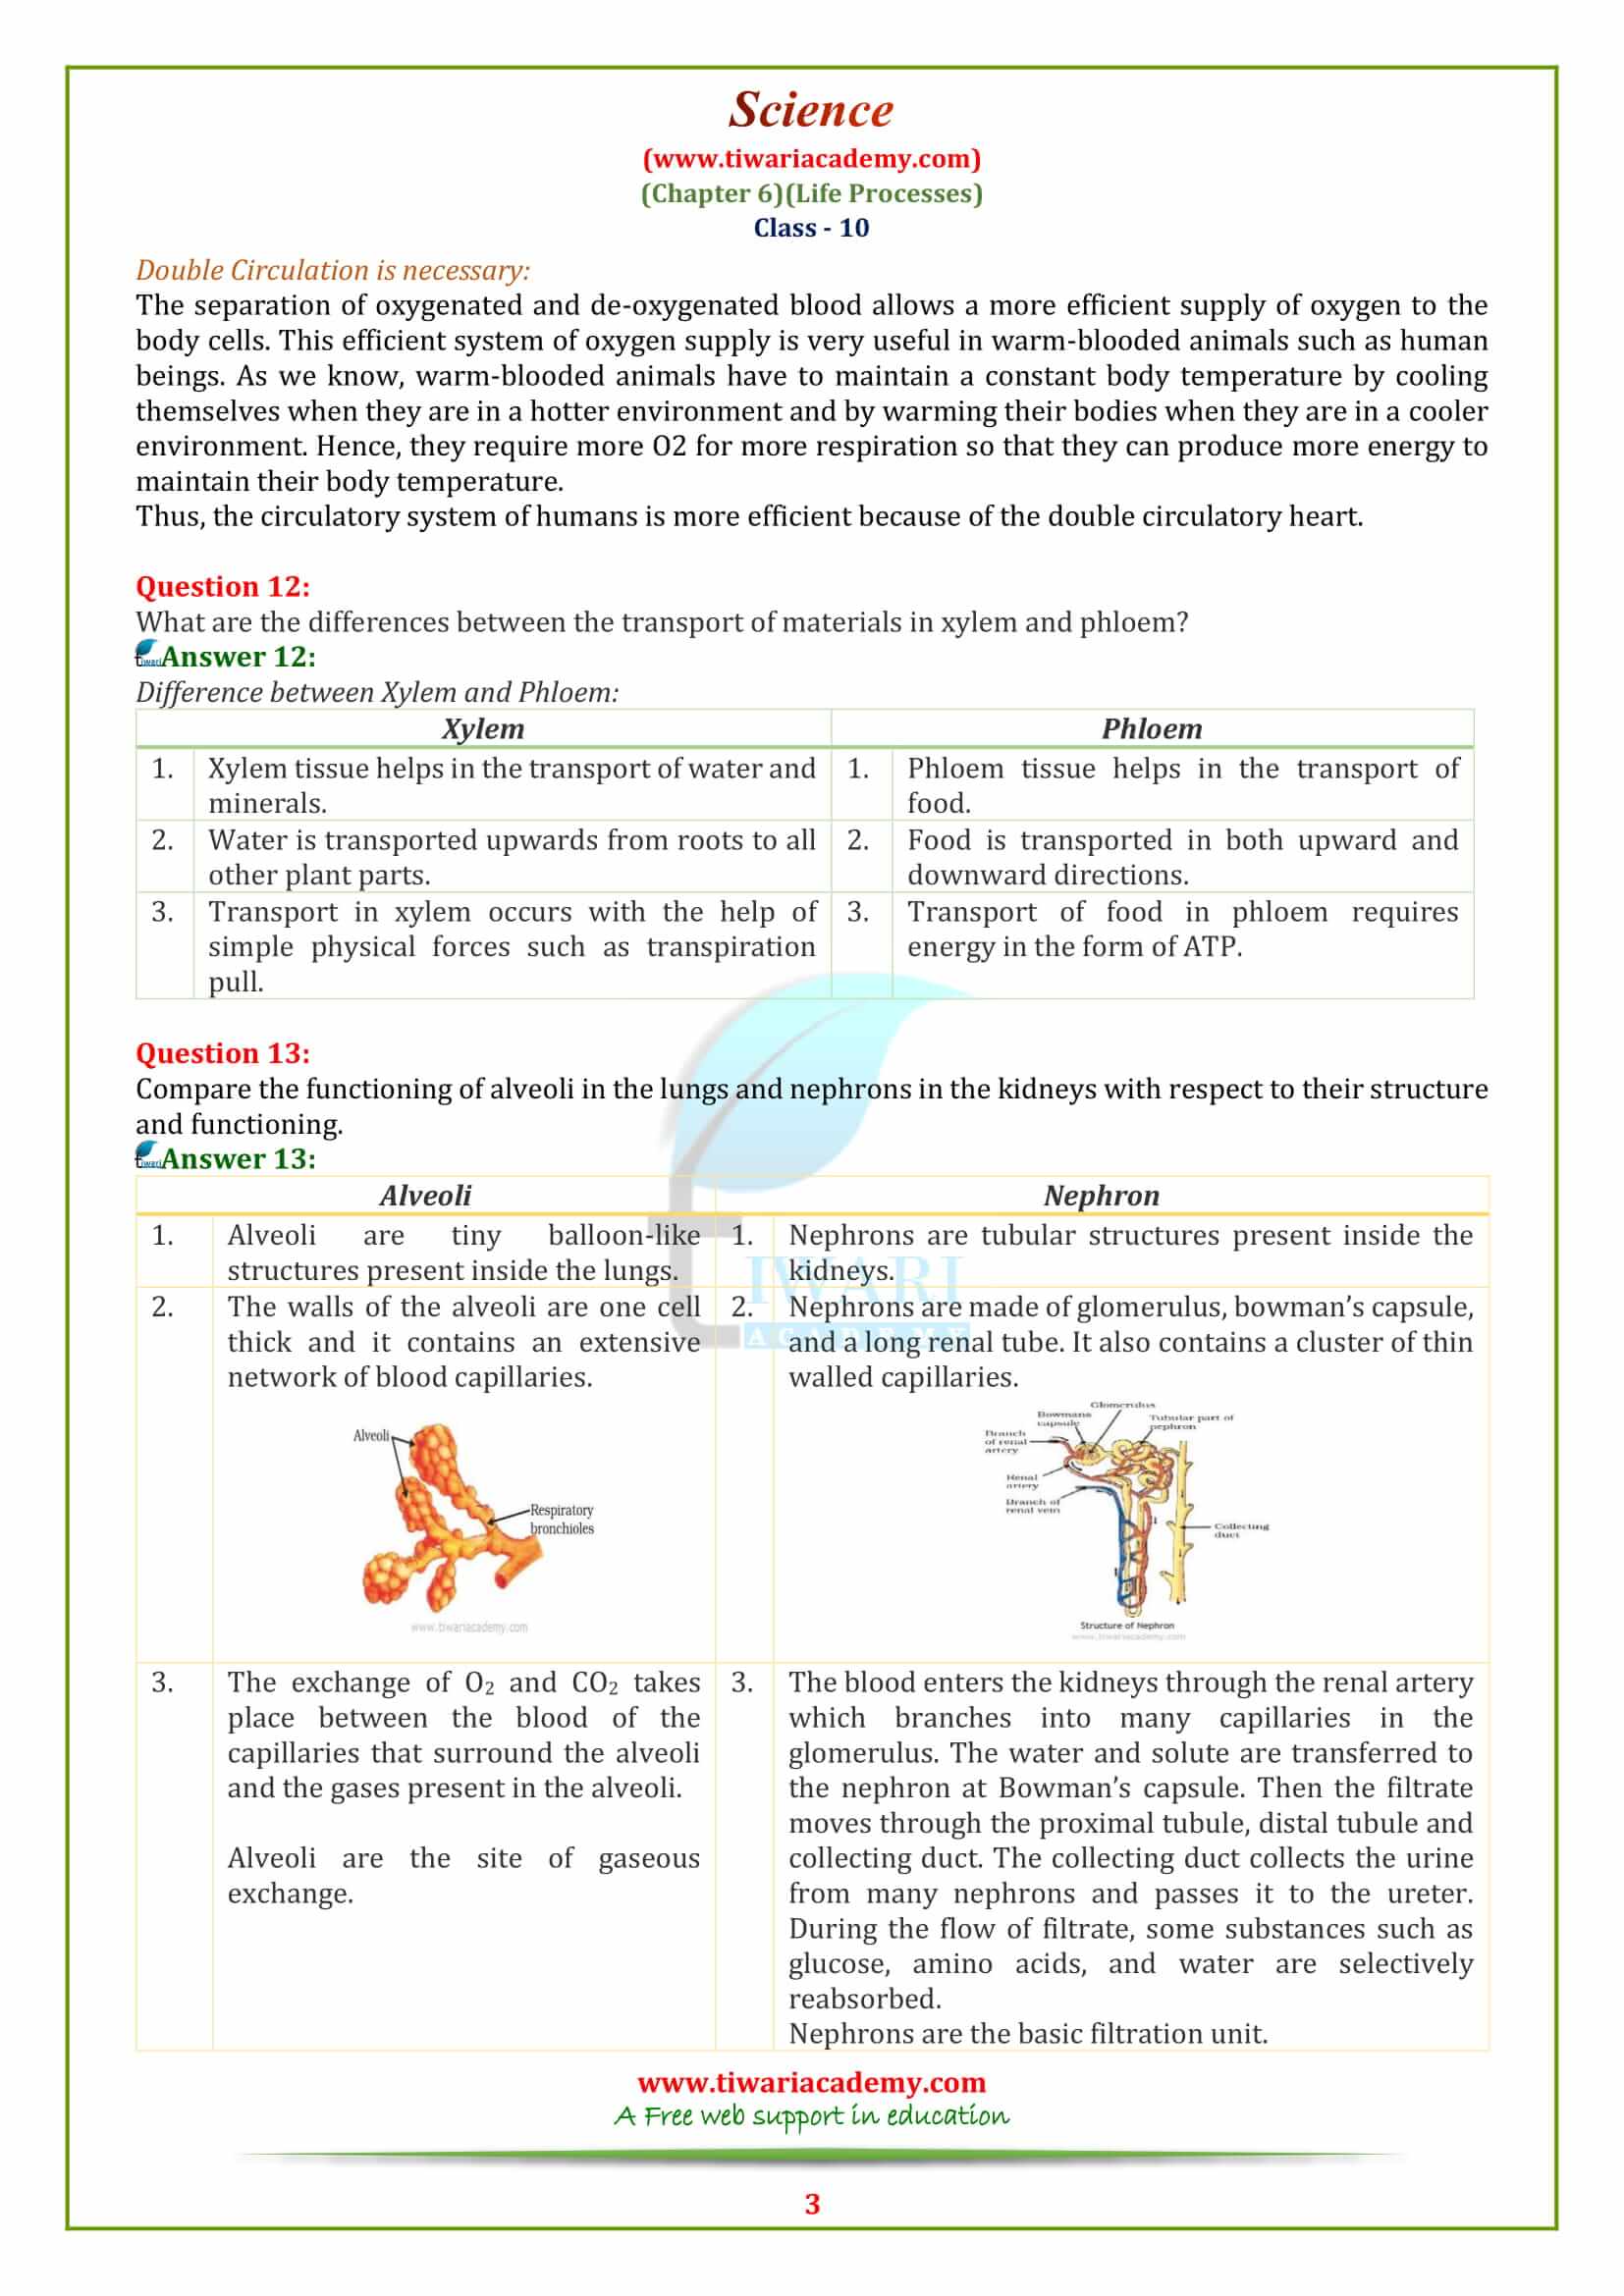 NCERT Solutions for 10 Science Chapter 6 Life Processes Exercises answers in english medium